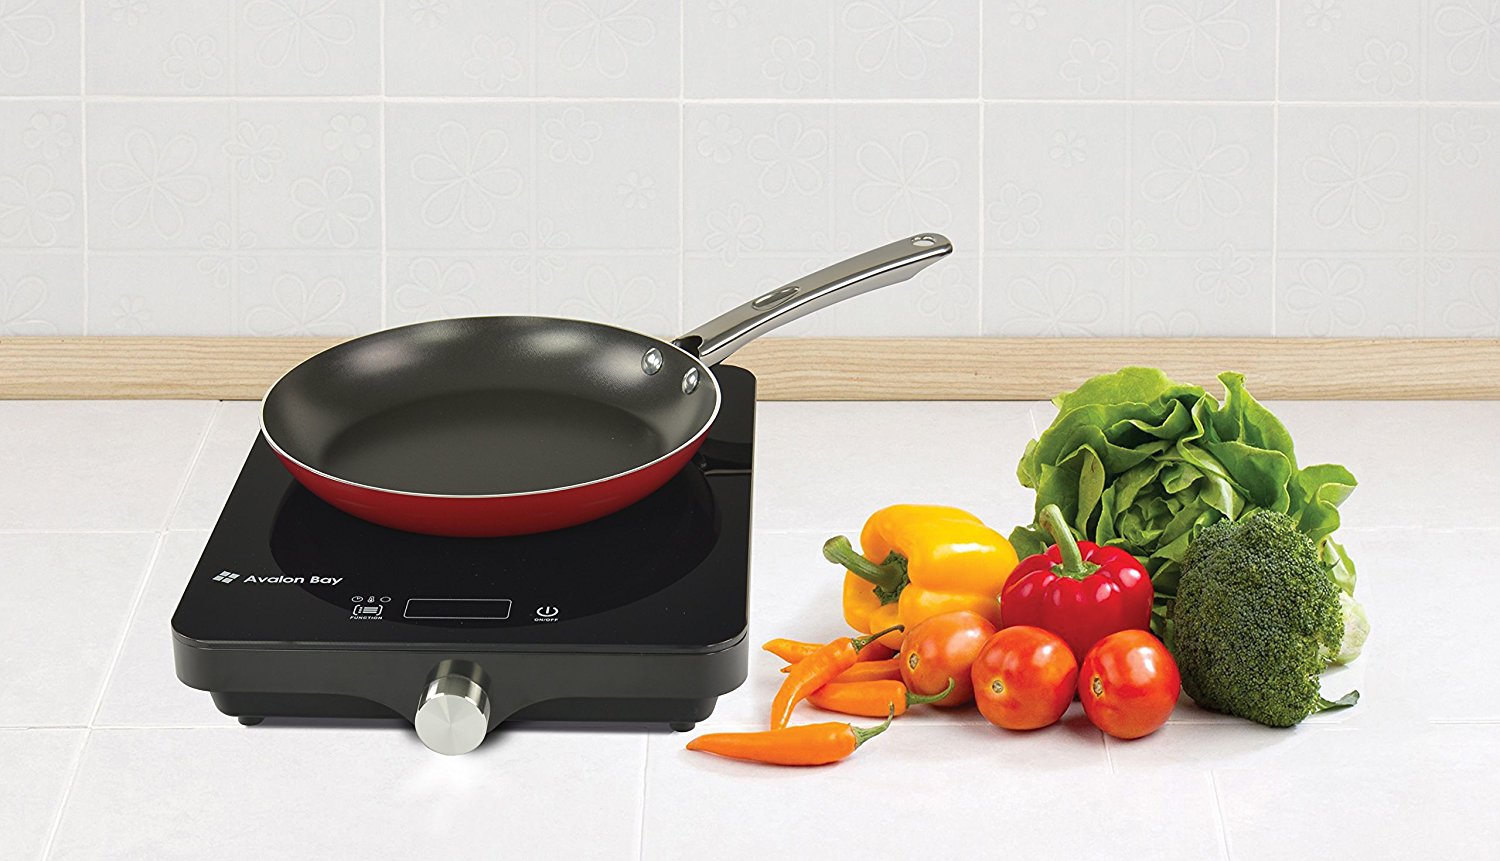 Avalon Bay IC100B Induction Cooktop - You can't Go Wrong with This One